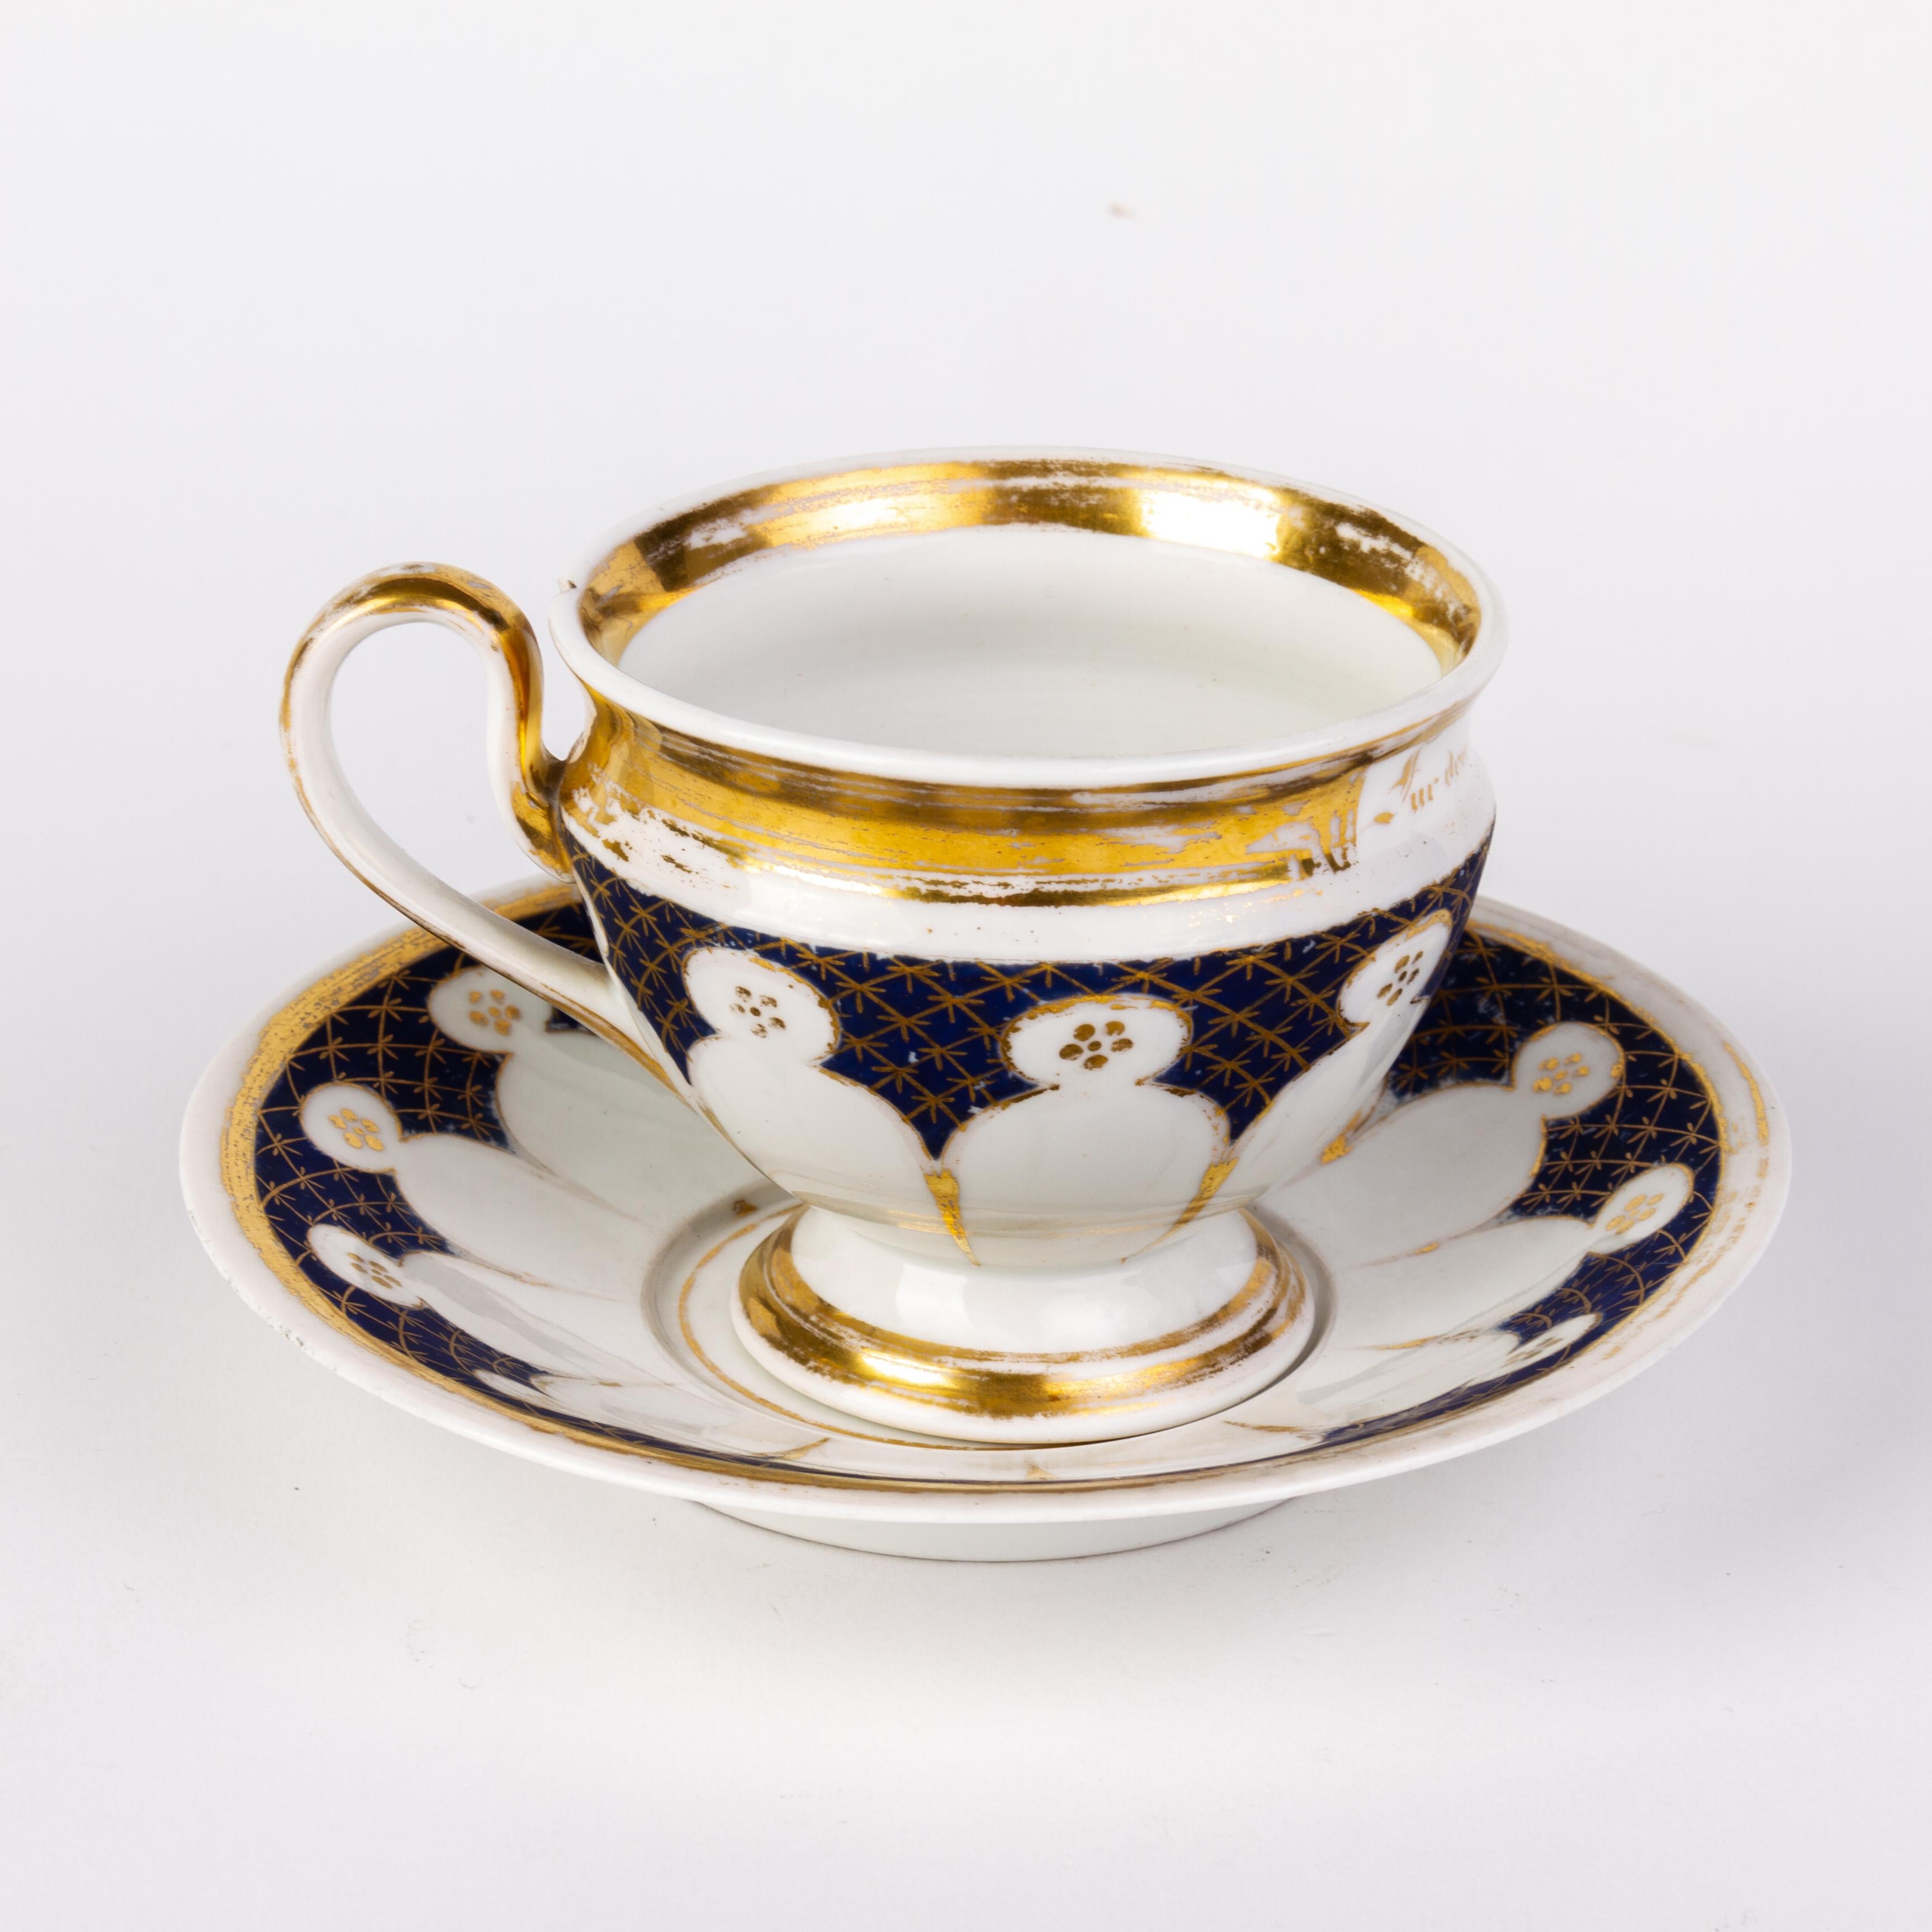 KPM Berlin German Fine Gilt Porcelain Cup & Saucer ca. 1835 19th Century 
Good condition overall, as seen, some fading to gilt gold around edges.
From a private collection.
Free international shipping.